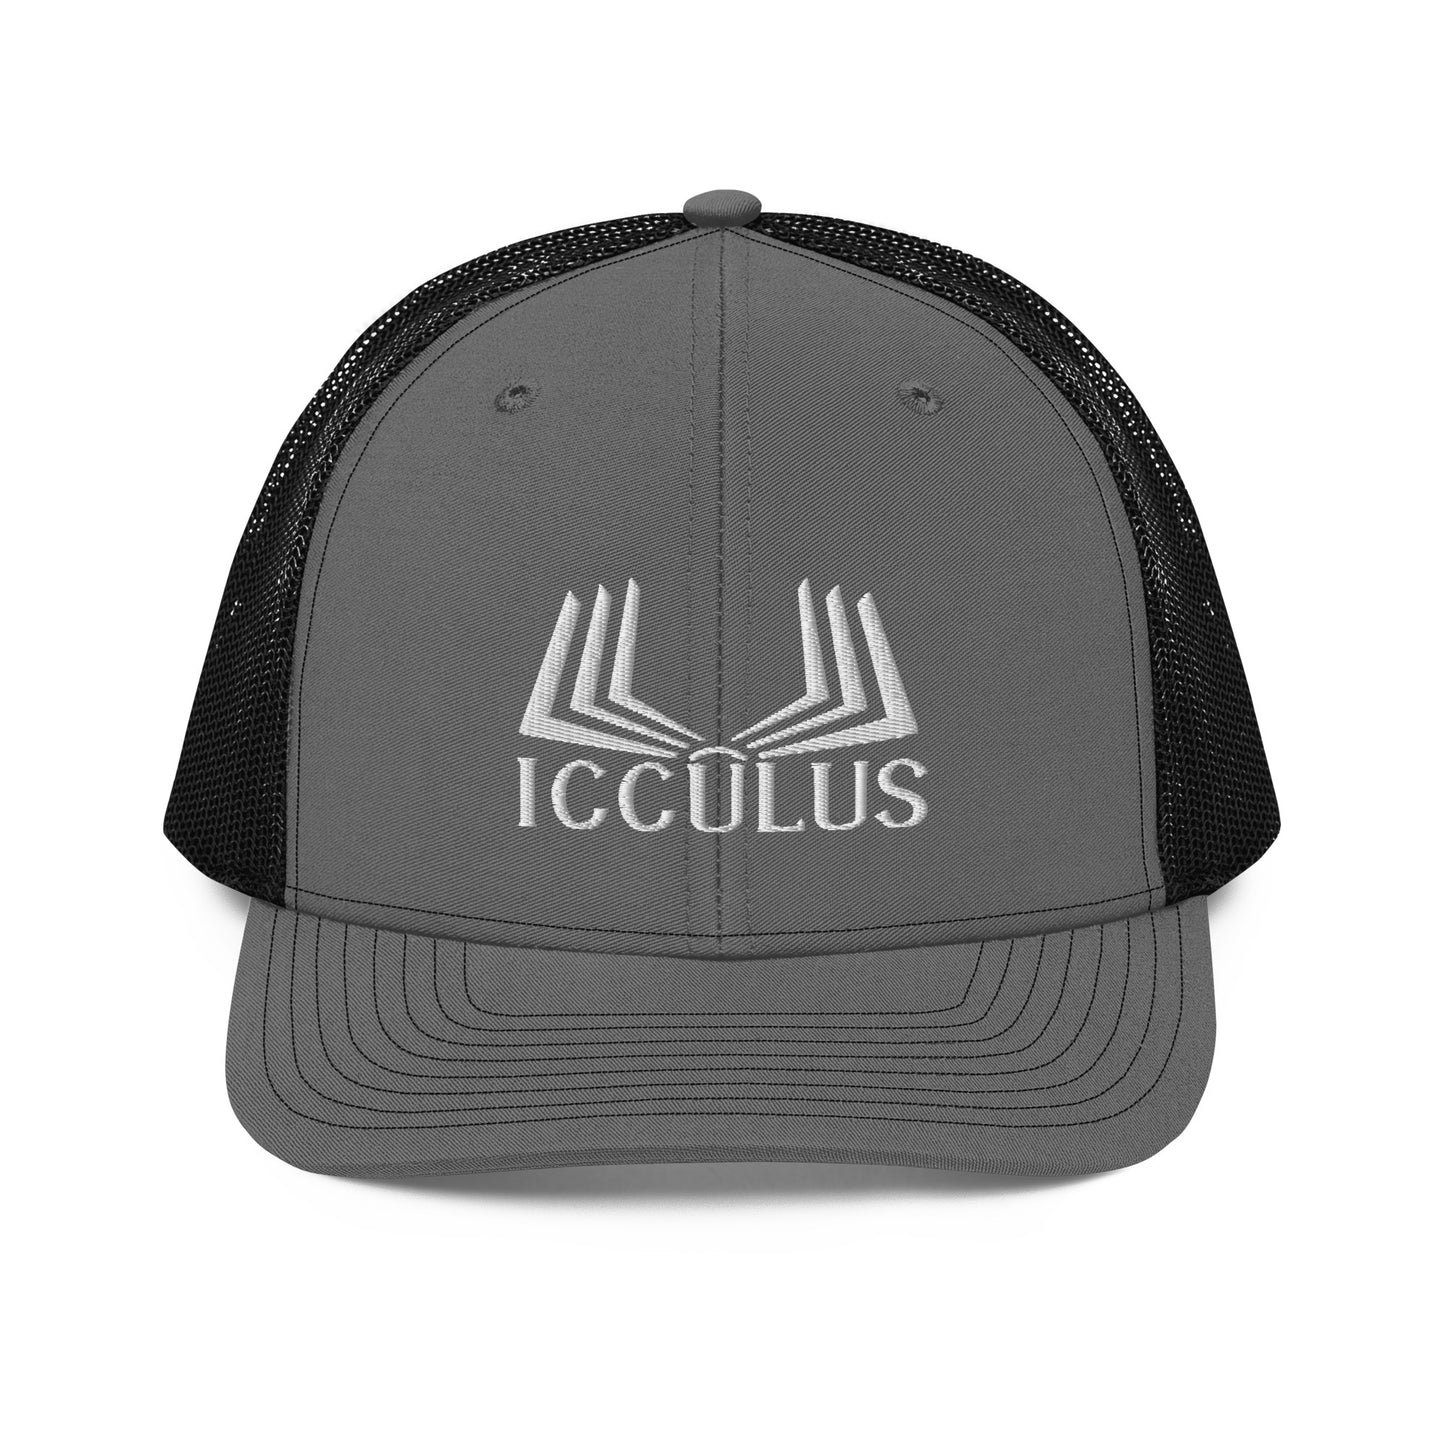 Icculus Book Embroidery 112 Snapback Cap